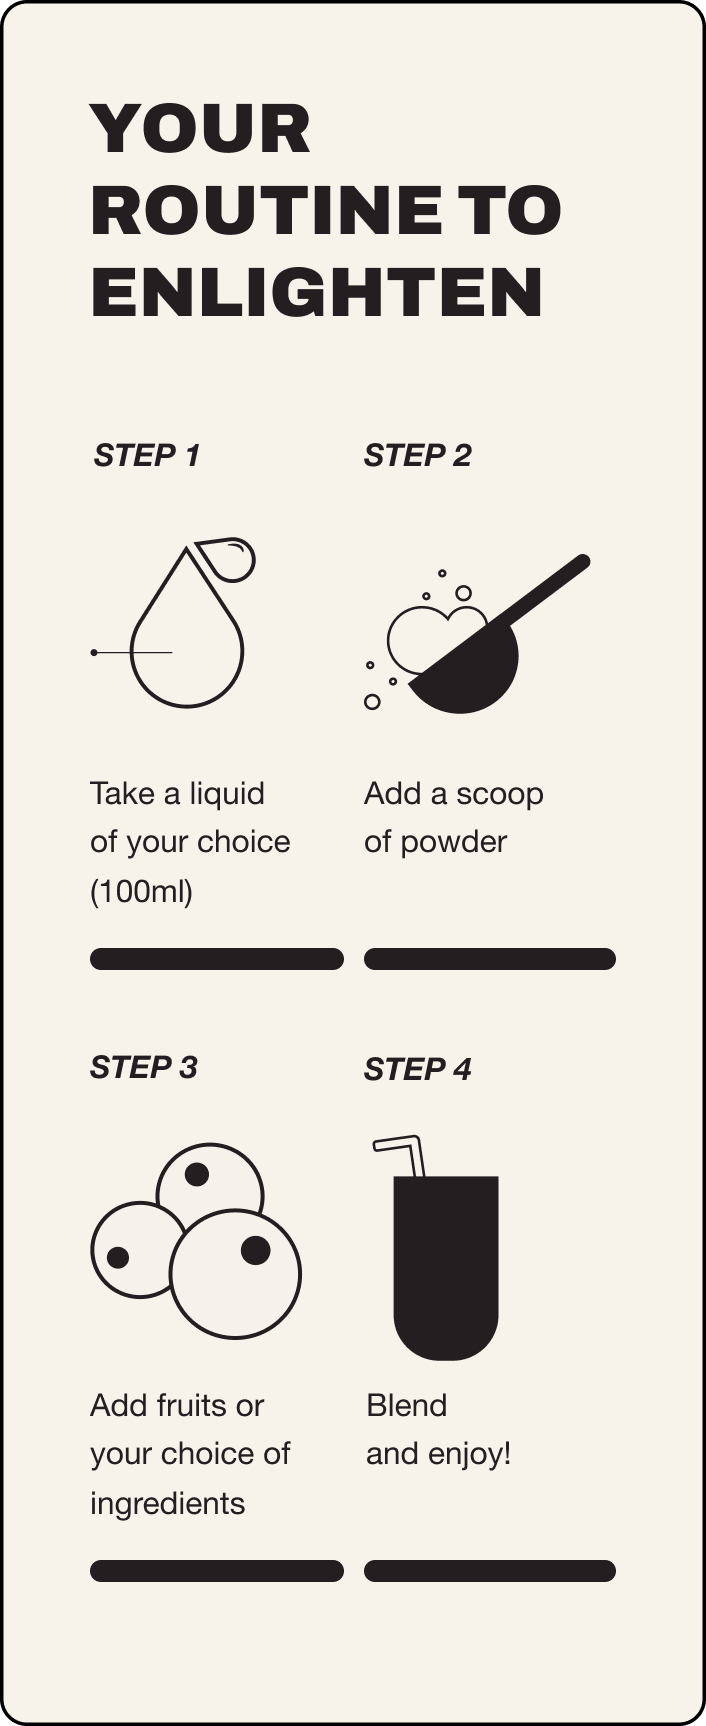 Your guide to enlighten. Step 1 take a liquid of your choice 100ml, step 2 add a scoop of powder, step 3 add fruits or your choice of ingredients, step 4 blend and enjoy!